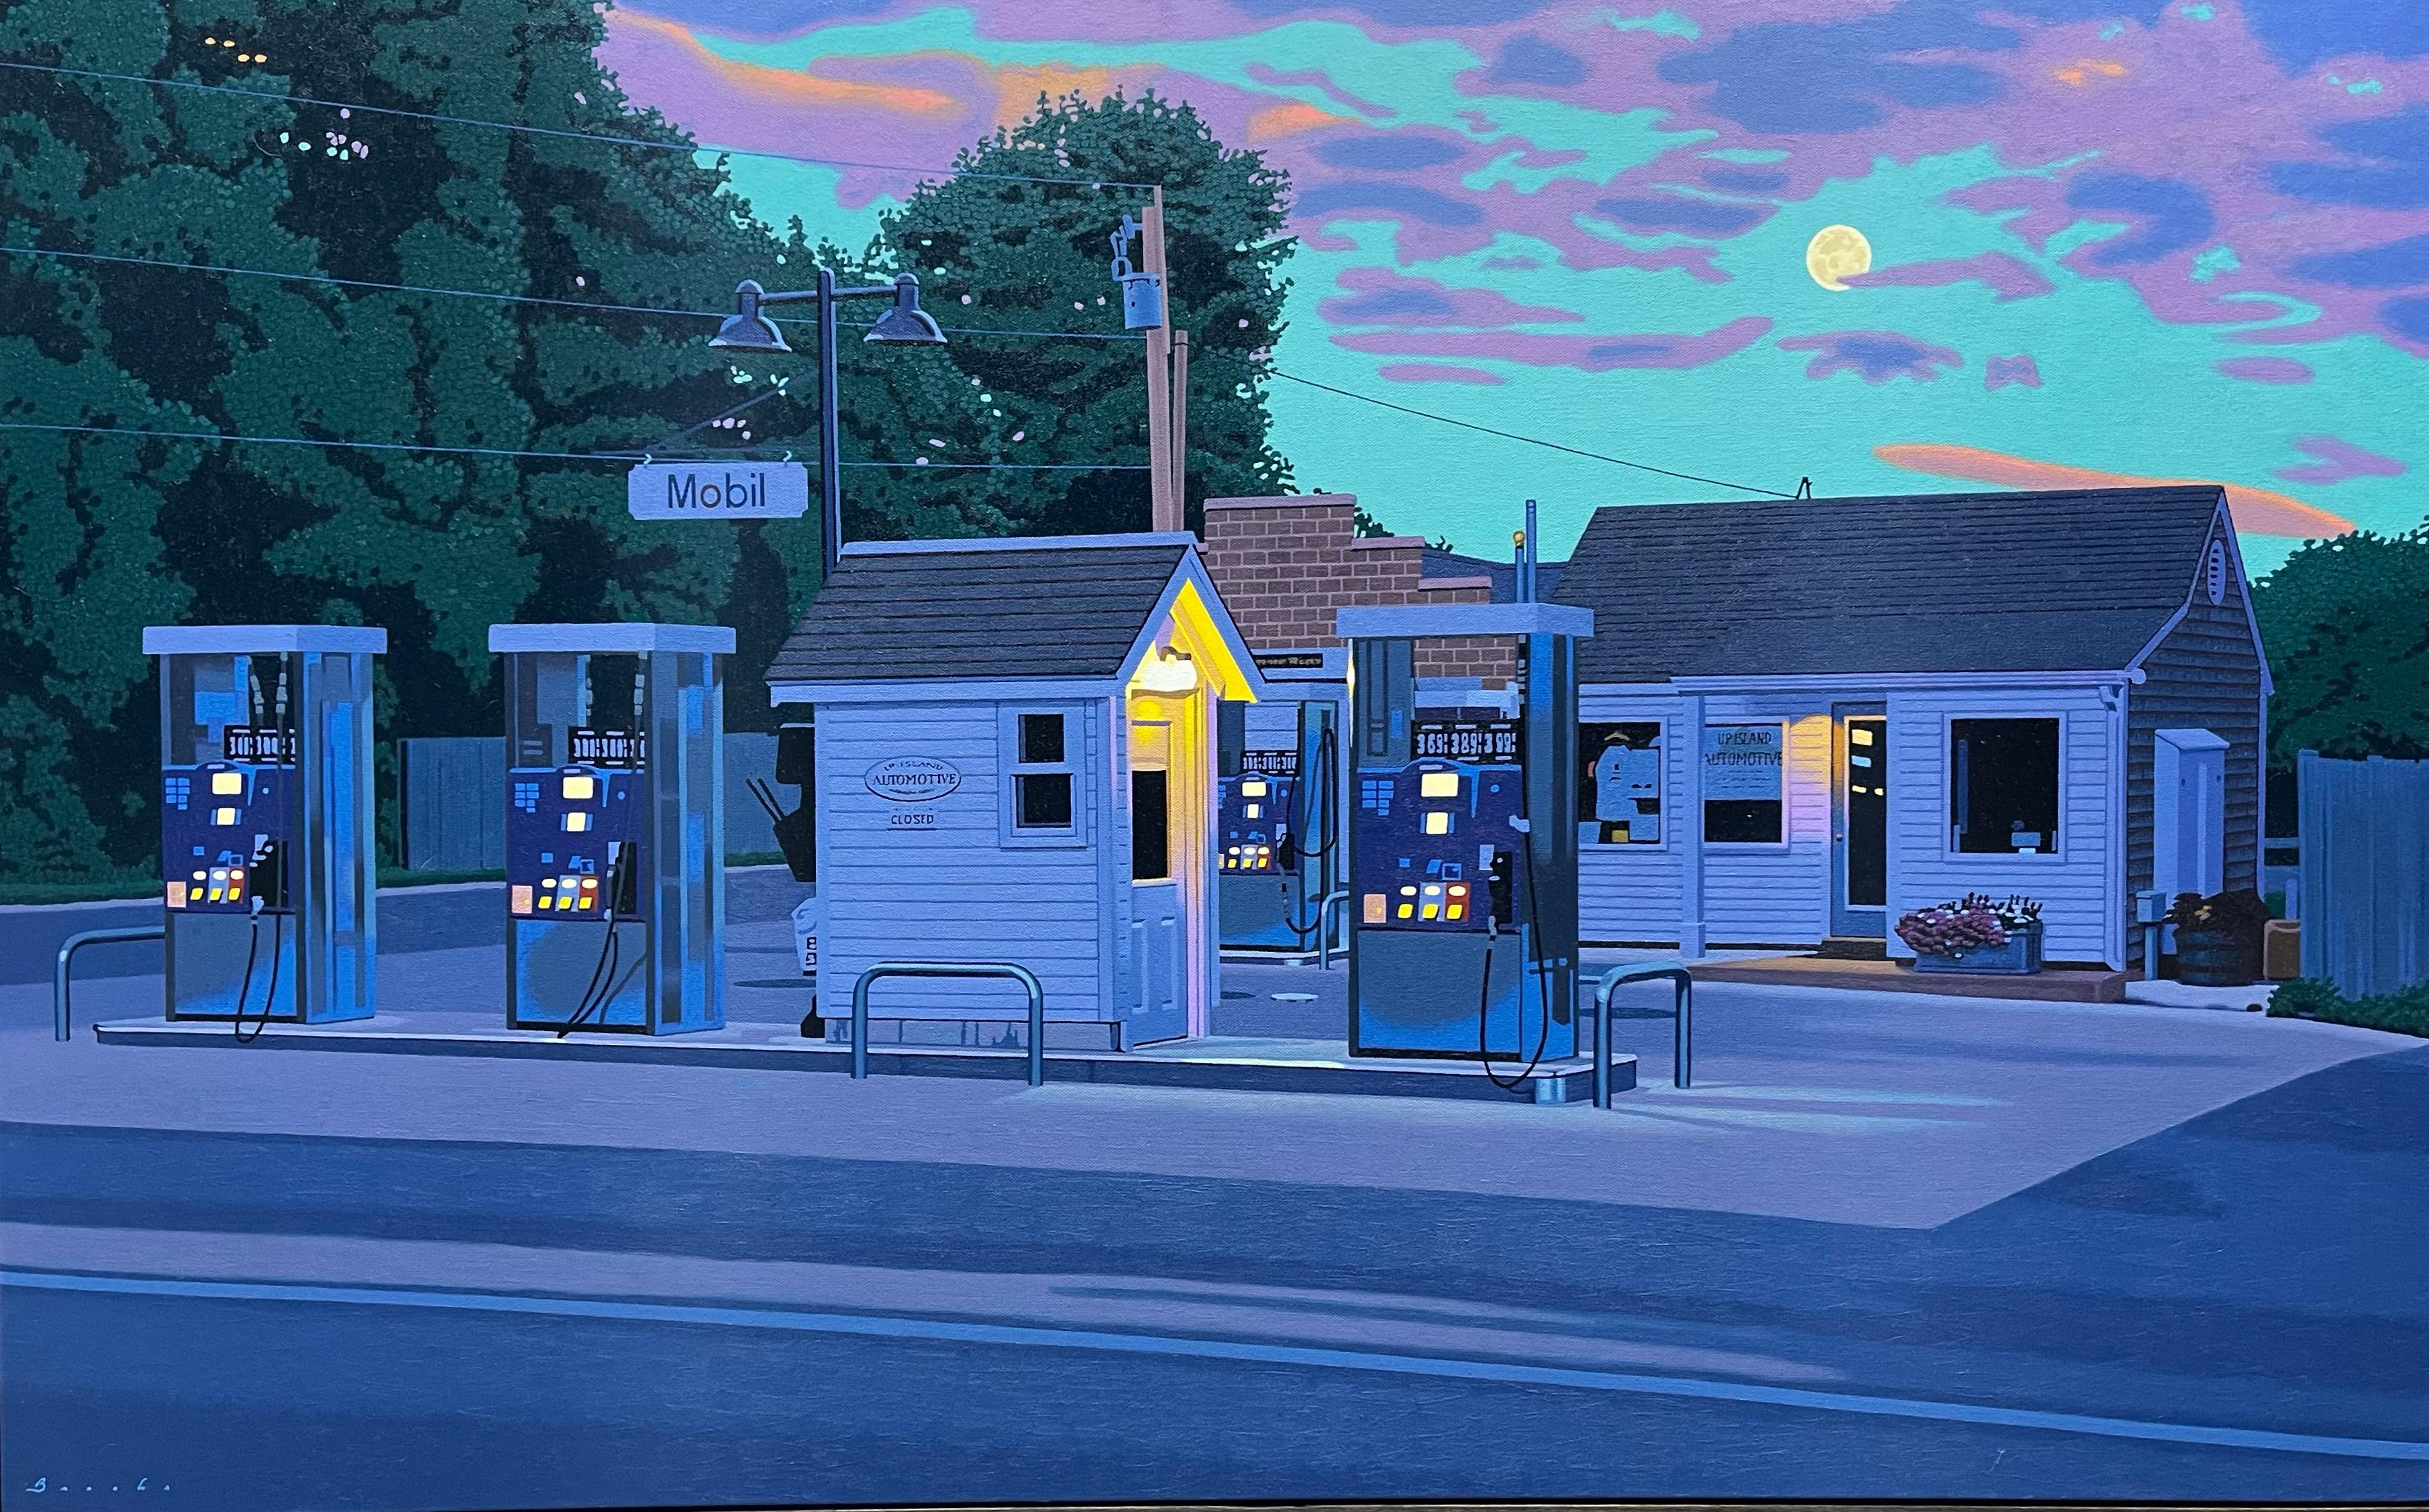 Rob Brooks Figurative Painting - "Up Island" Oil painting of a Mobil gas station at night in the moonlight